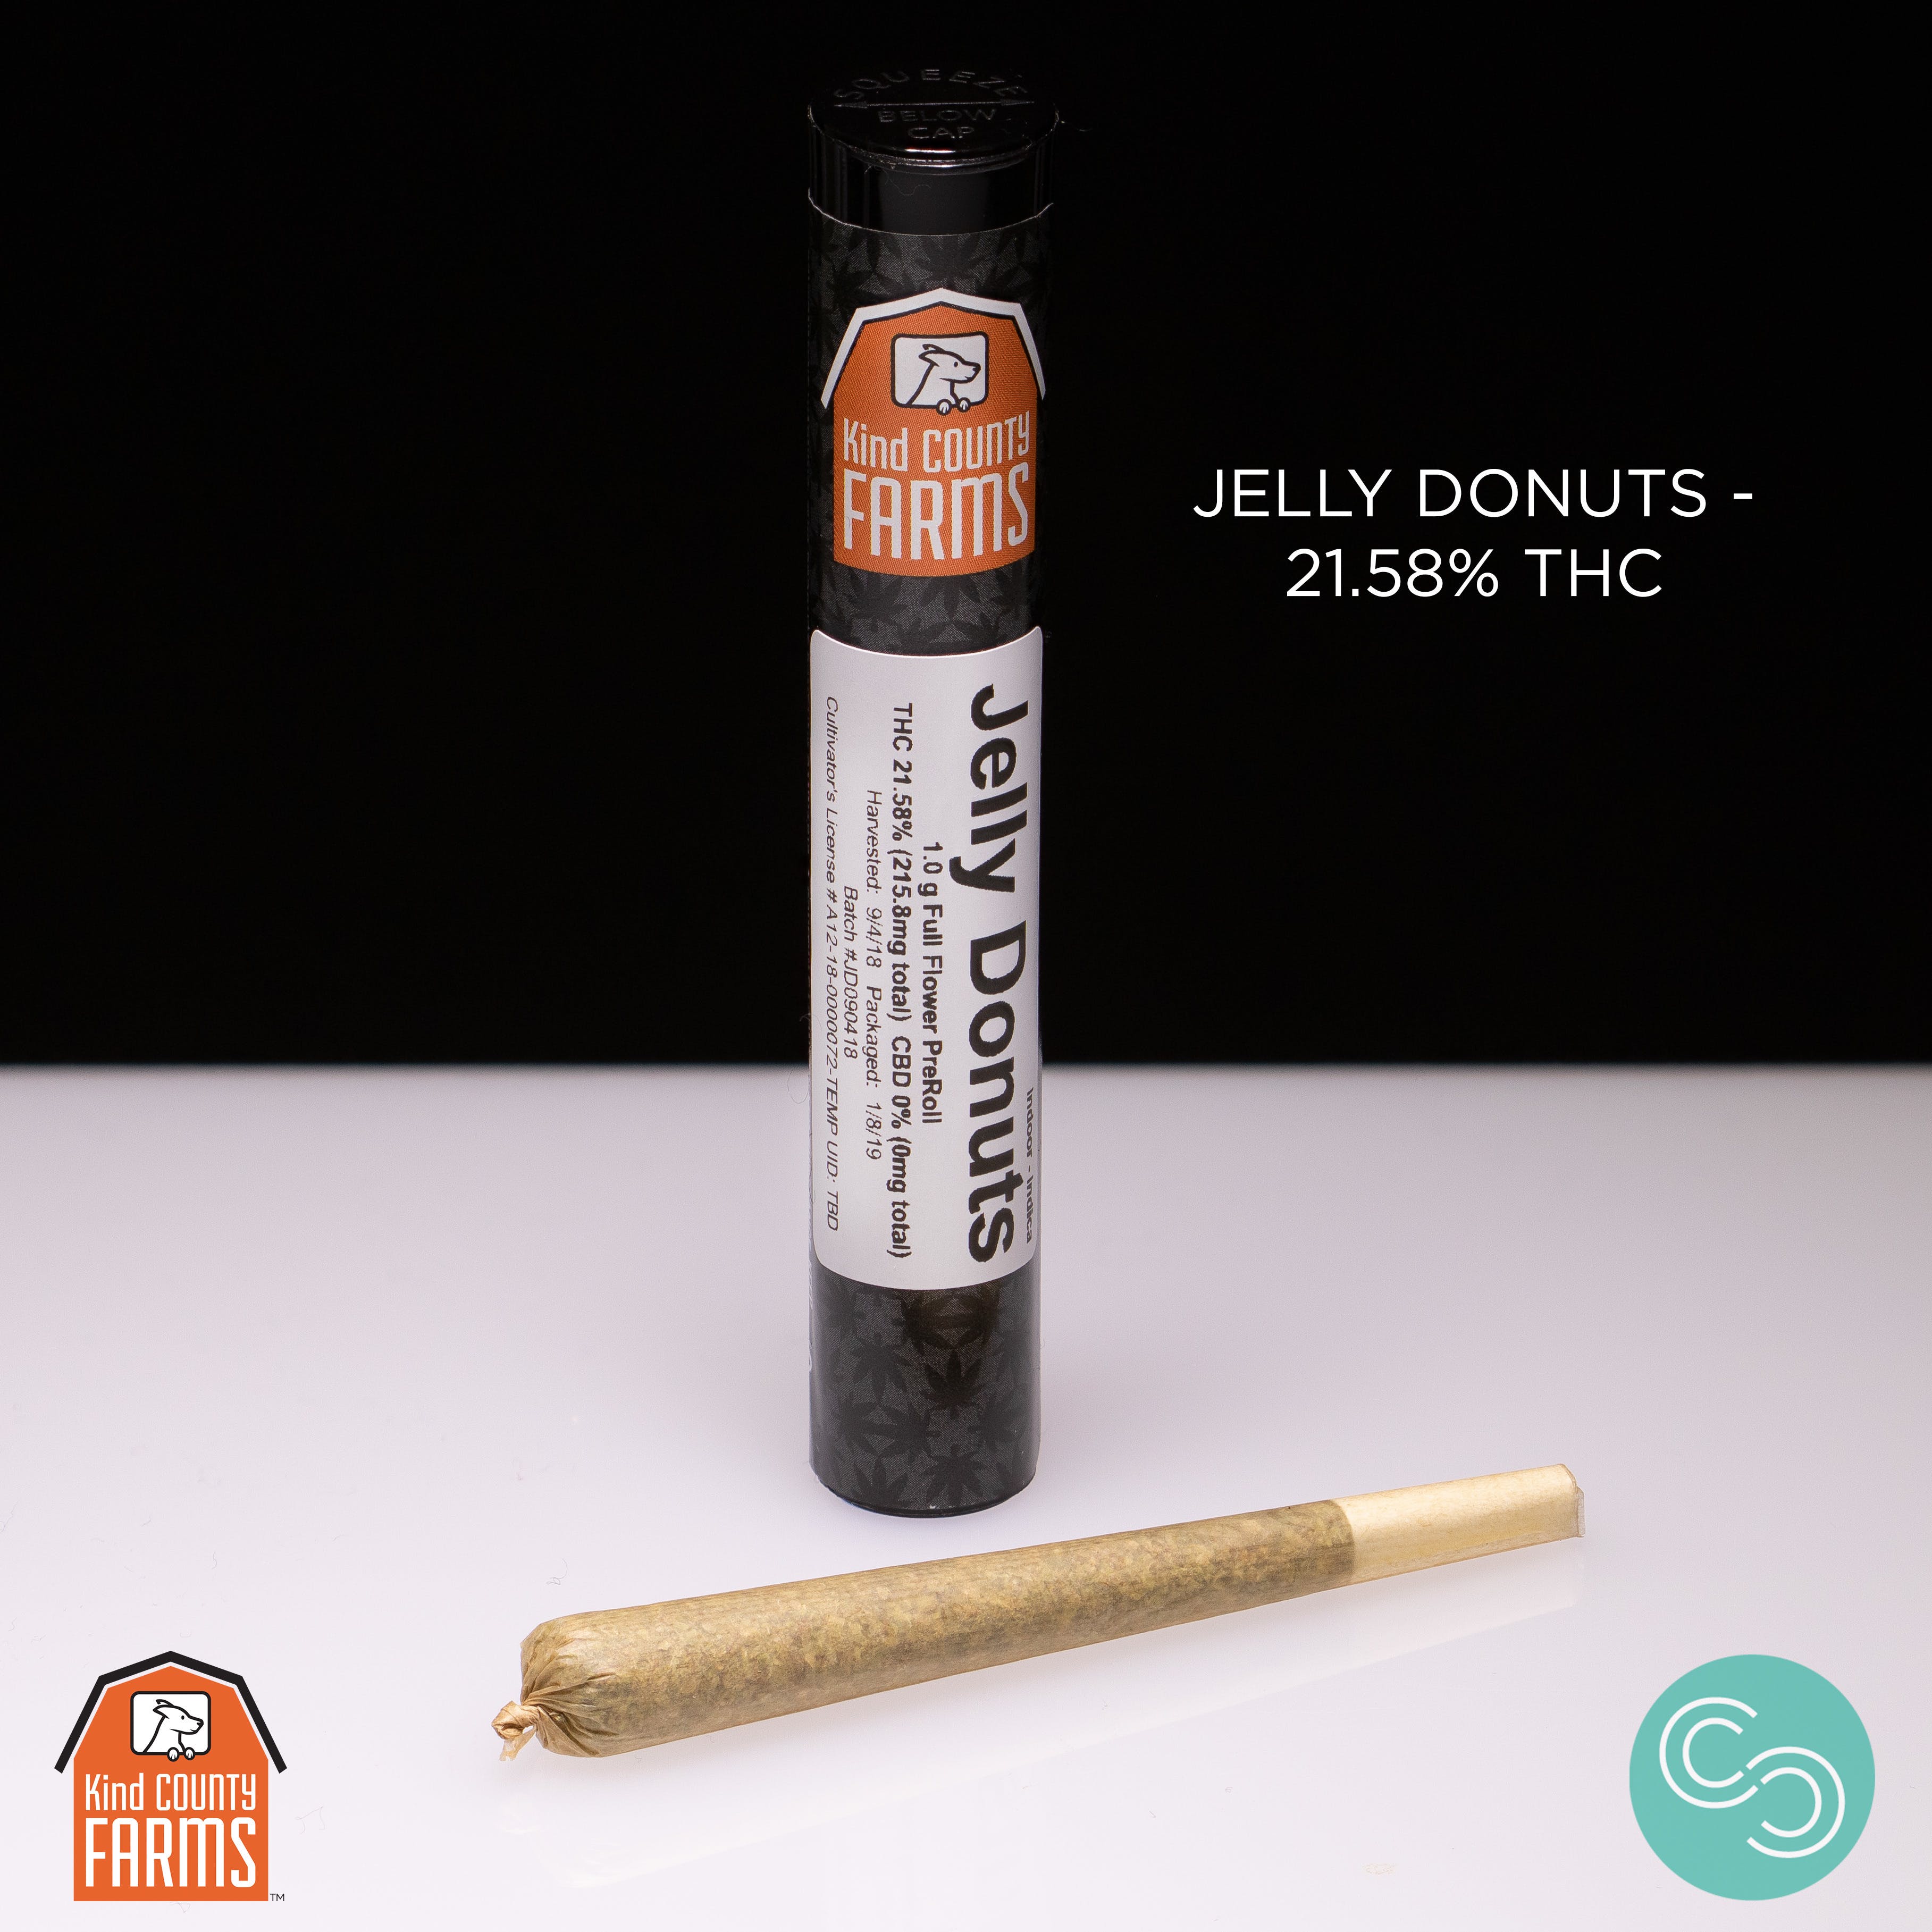 Kind County - Jelly Donuts - 21.58% THC